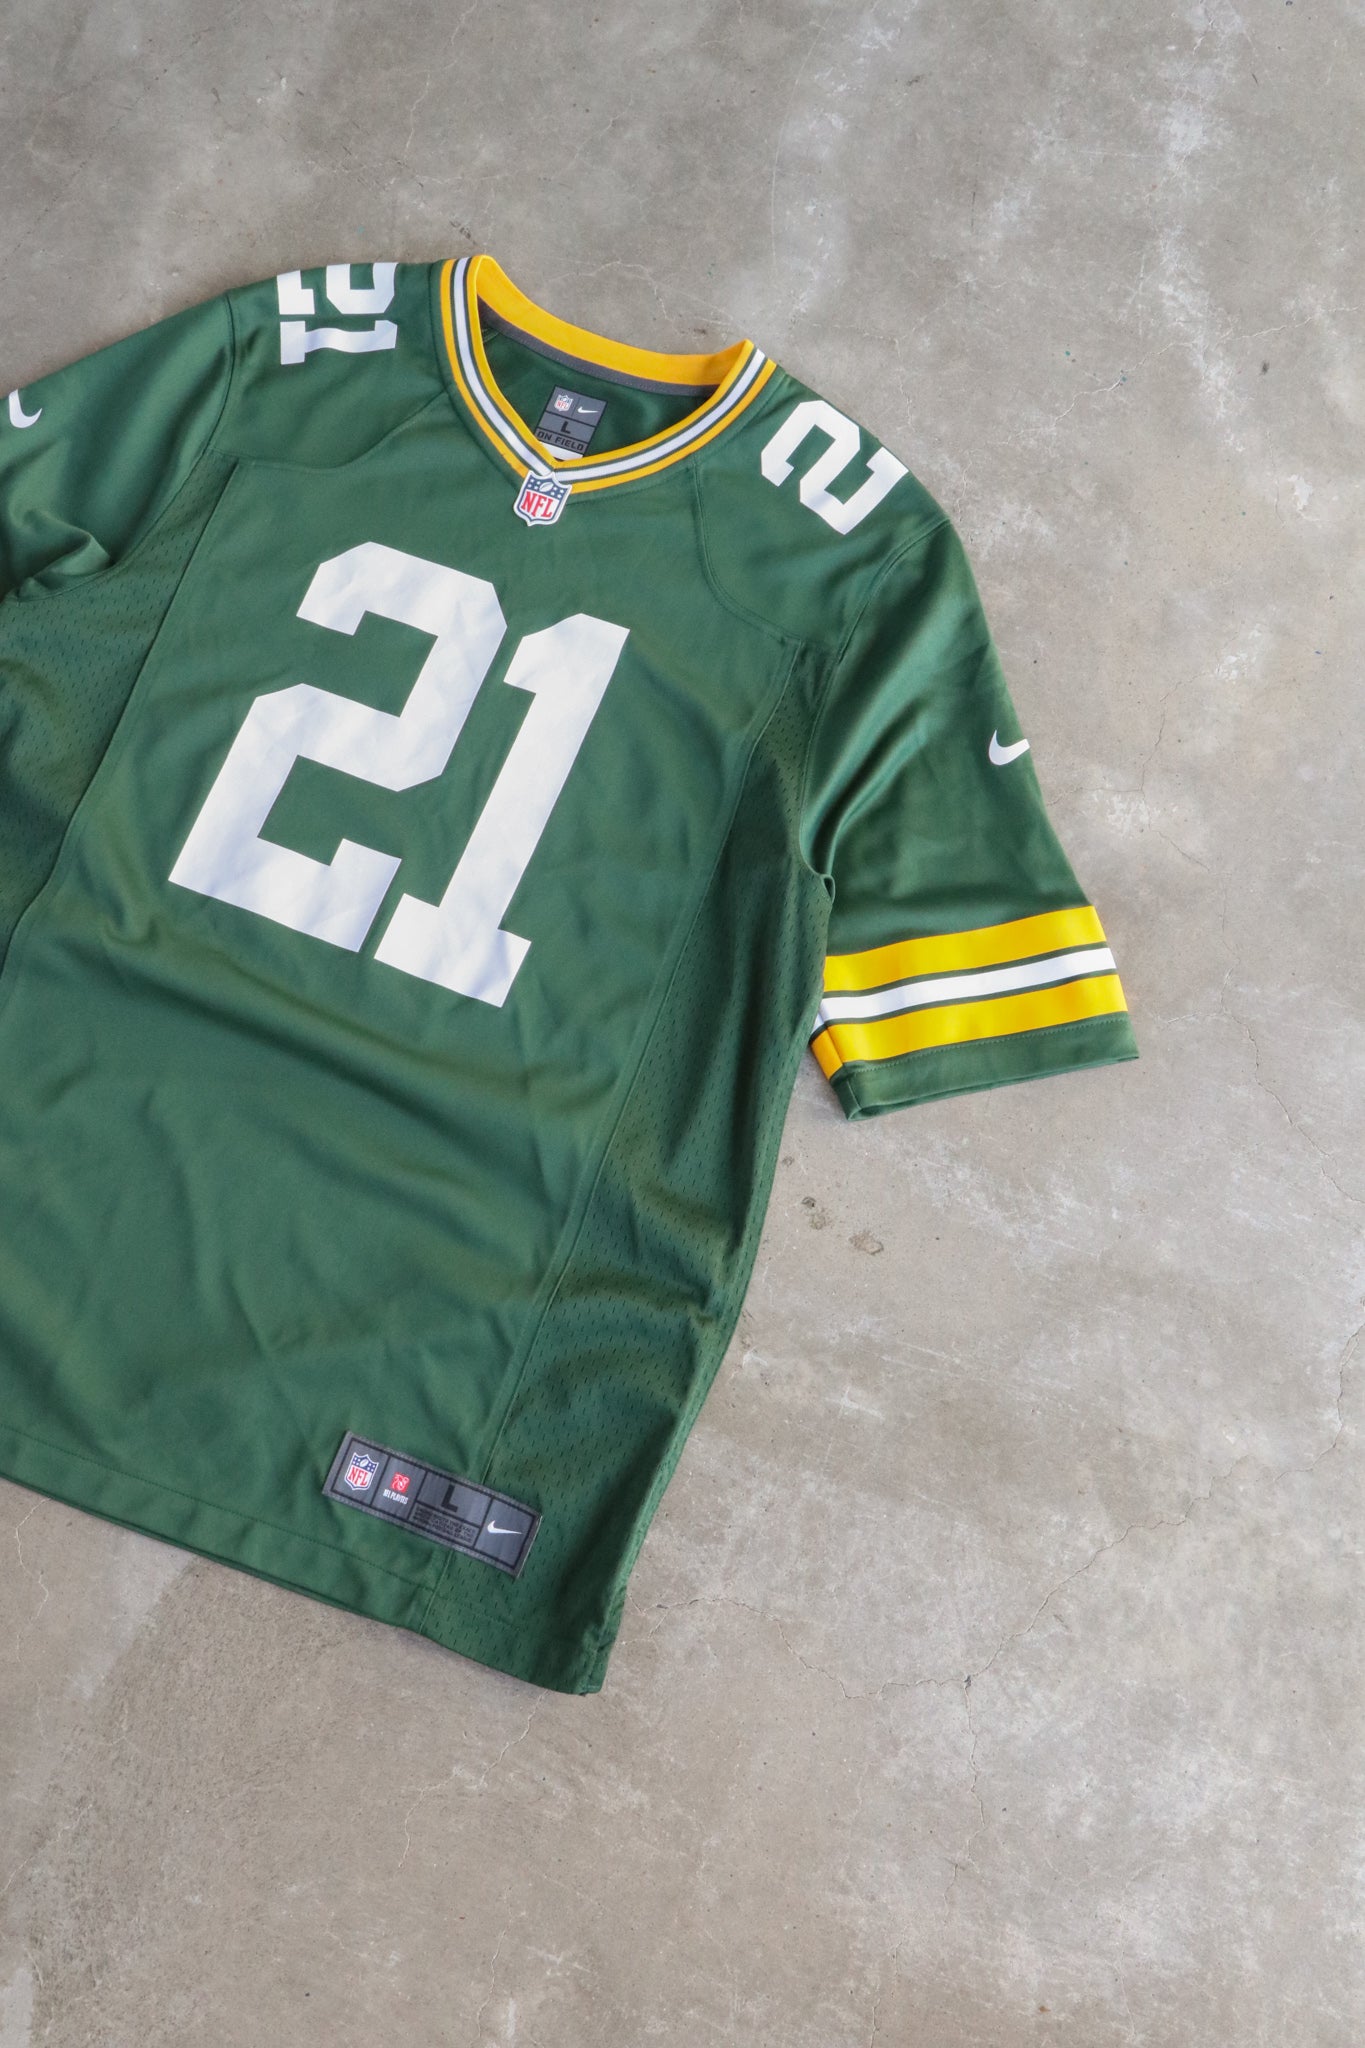 Vintage NFL Green Bay Packers Clinton-Dix Jersey Large